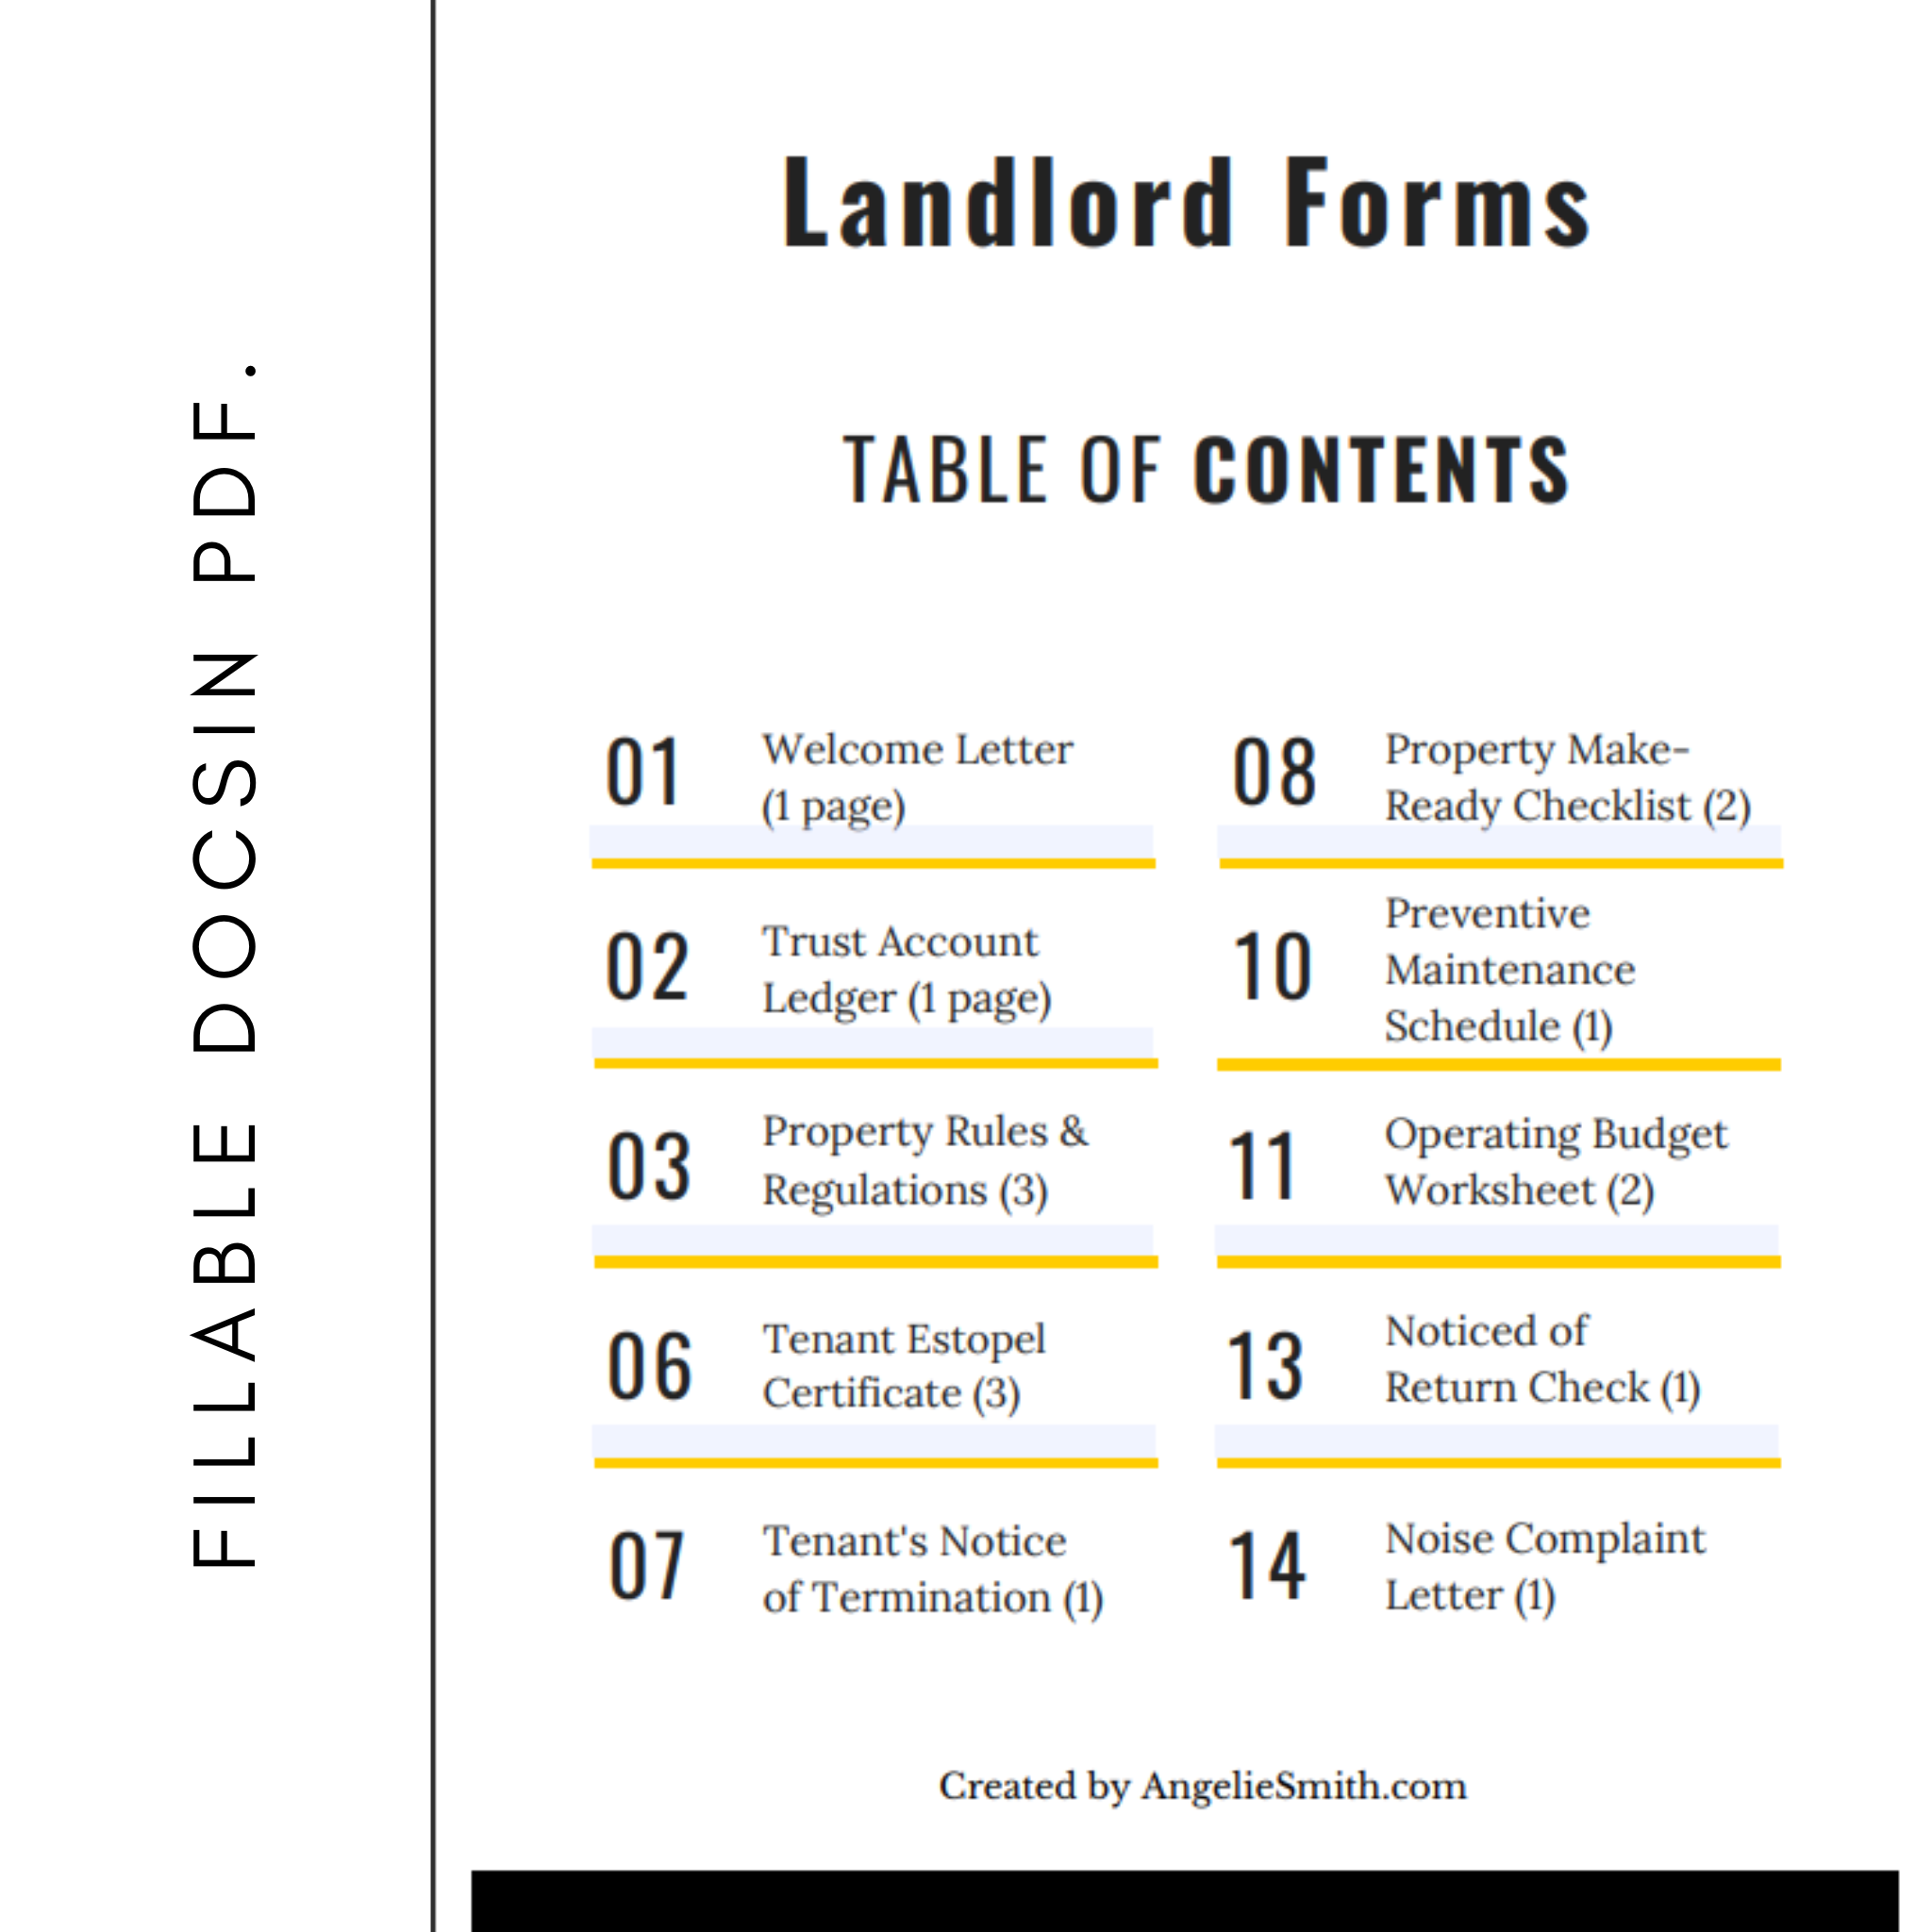 Landlord Forms Property Management Templates for Real Estate Listings Business 29 Documents